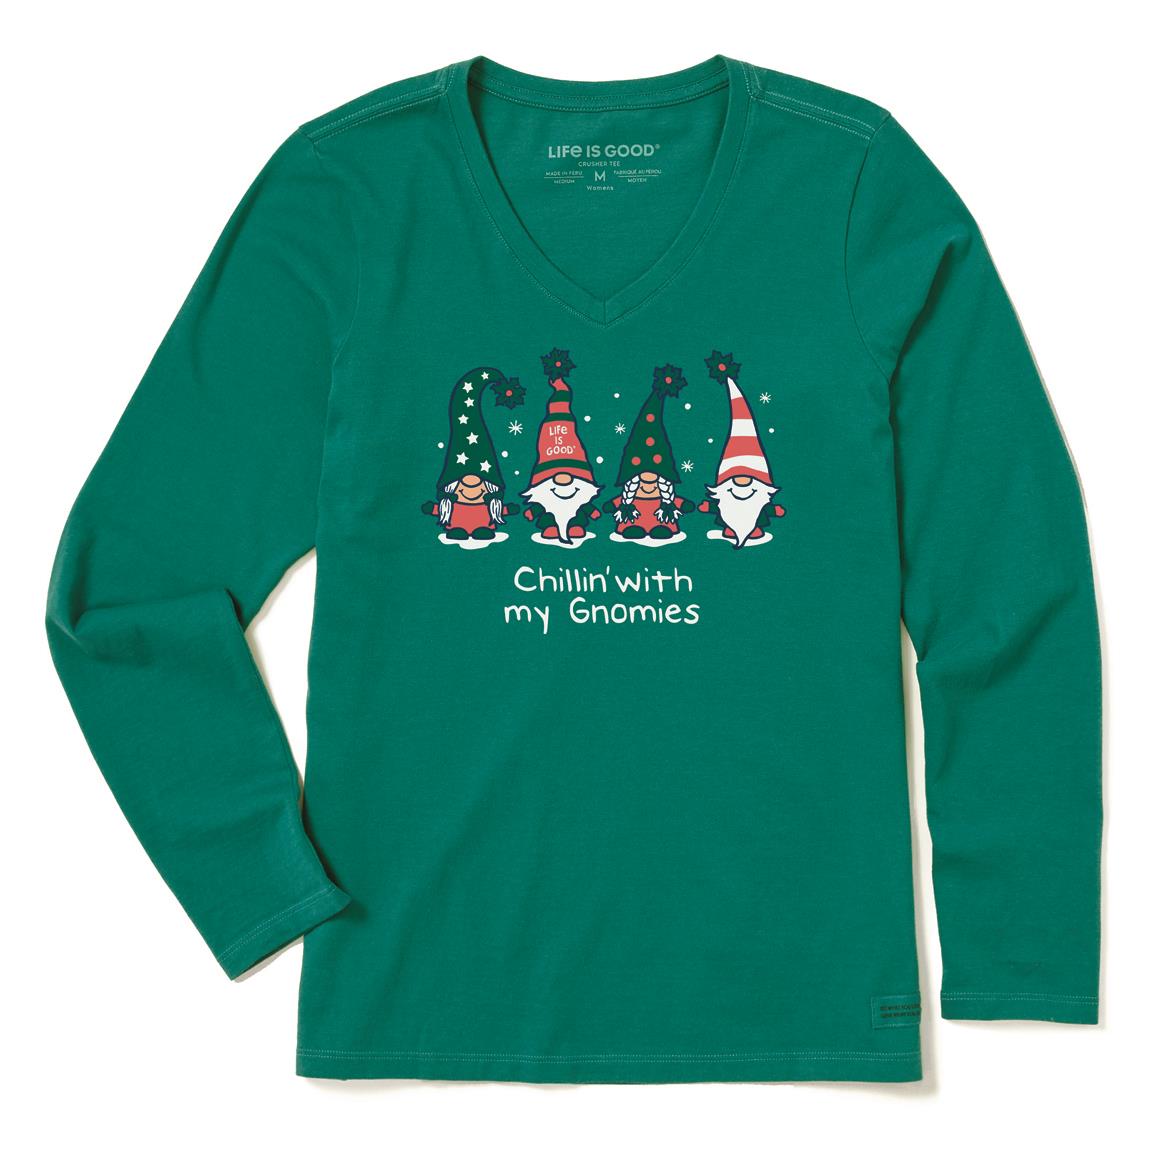 Life Is Good Women's Chillin' With My Gnomies Family Crusher Vee Shirt, Spruce Green